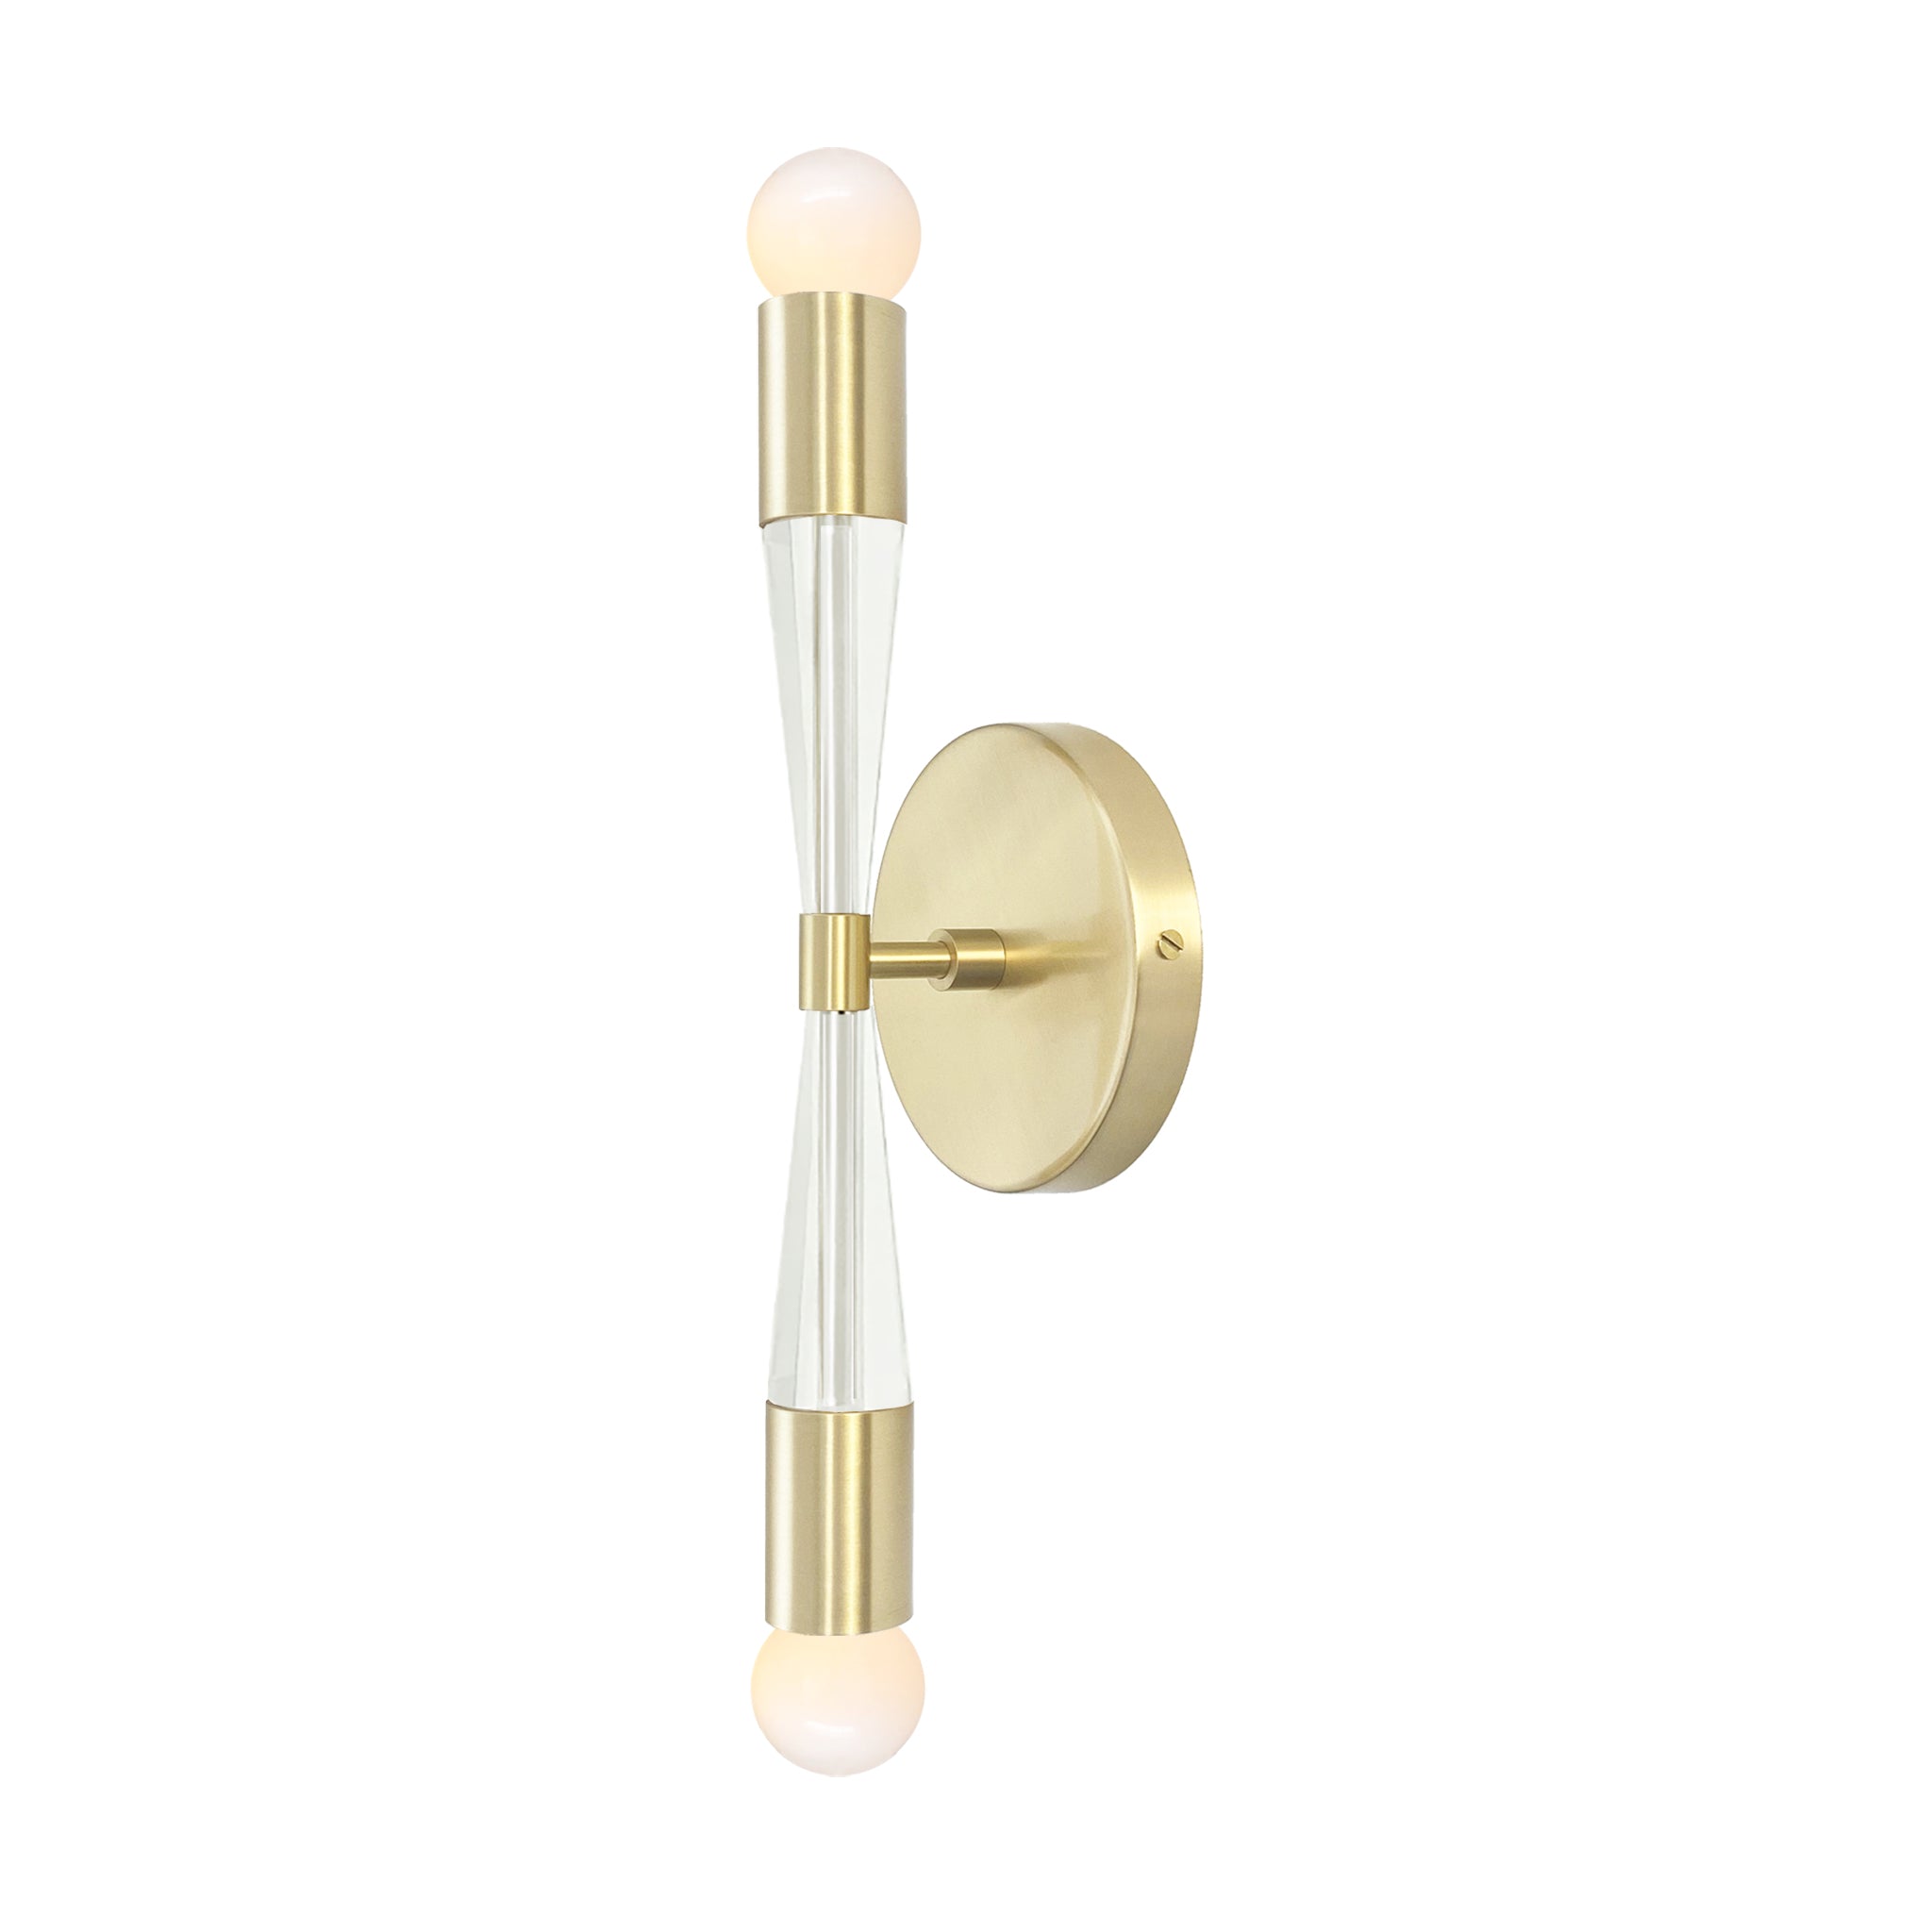 Brass and bone color Phoenix sconce Dutton Brown lighting